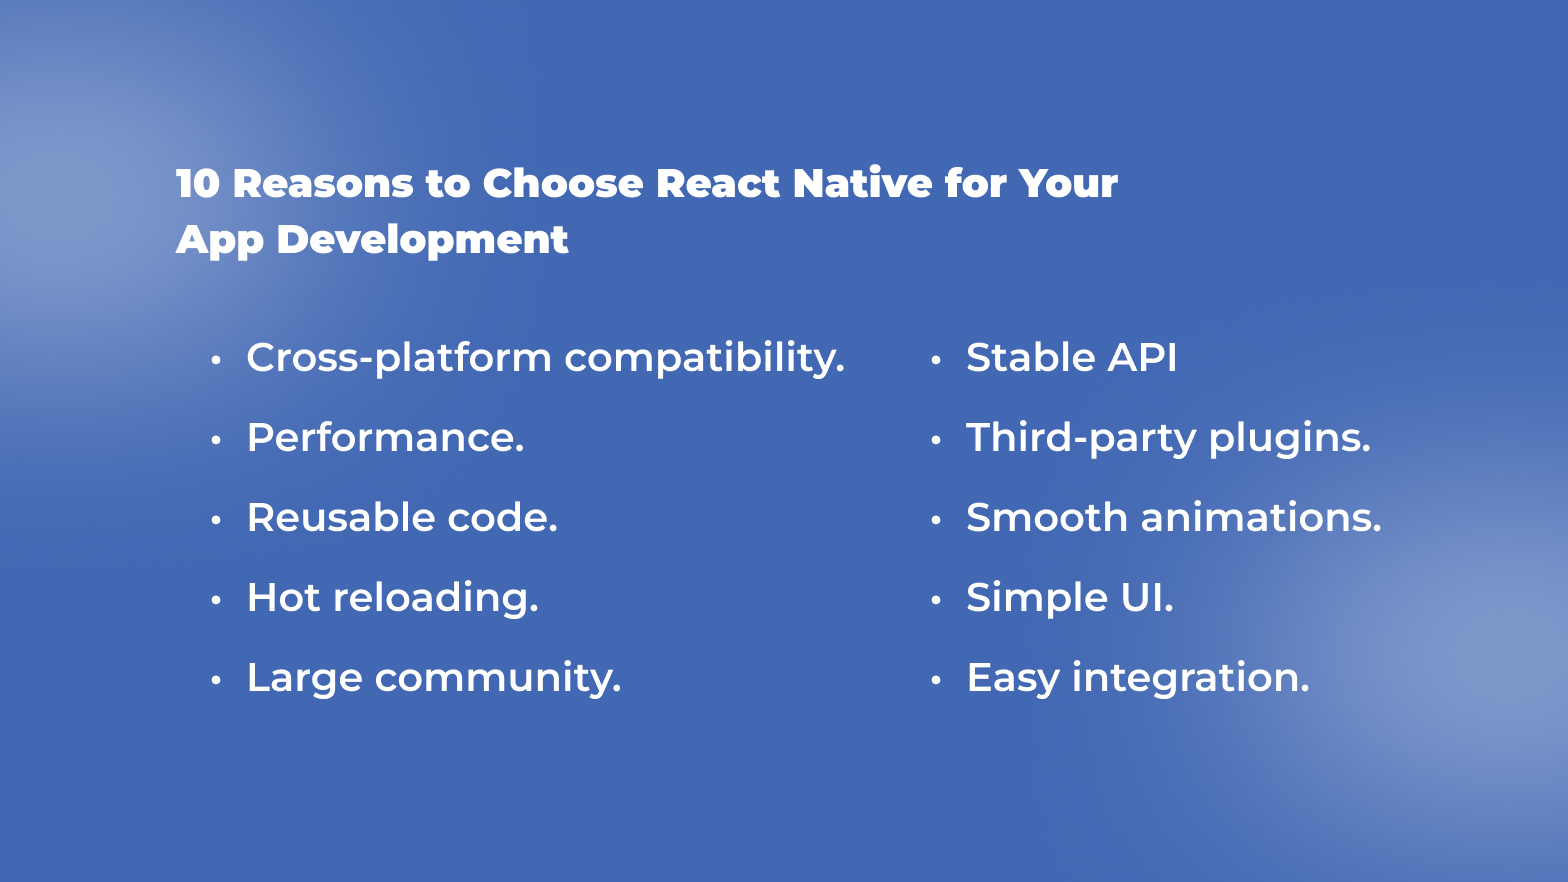 10 Reasons to Choose React Native for Your App Development.